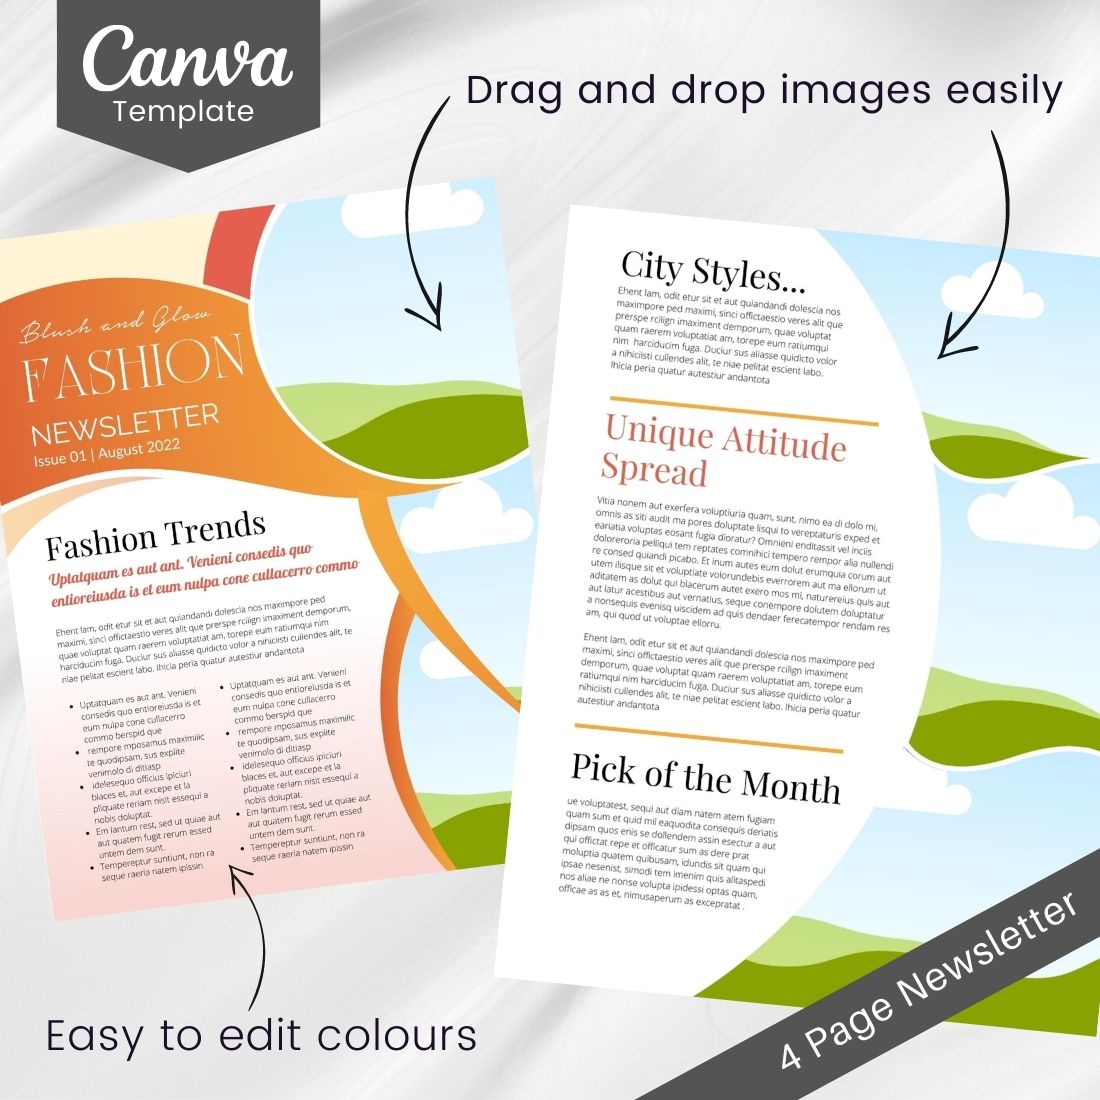 Drag and drop easily with Canva Newsletter Template For Models and Fashion.